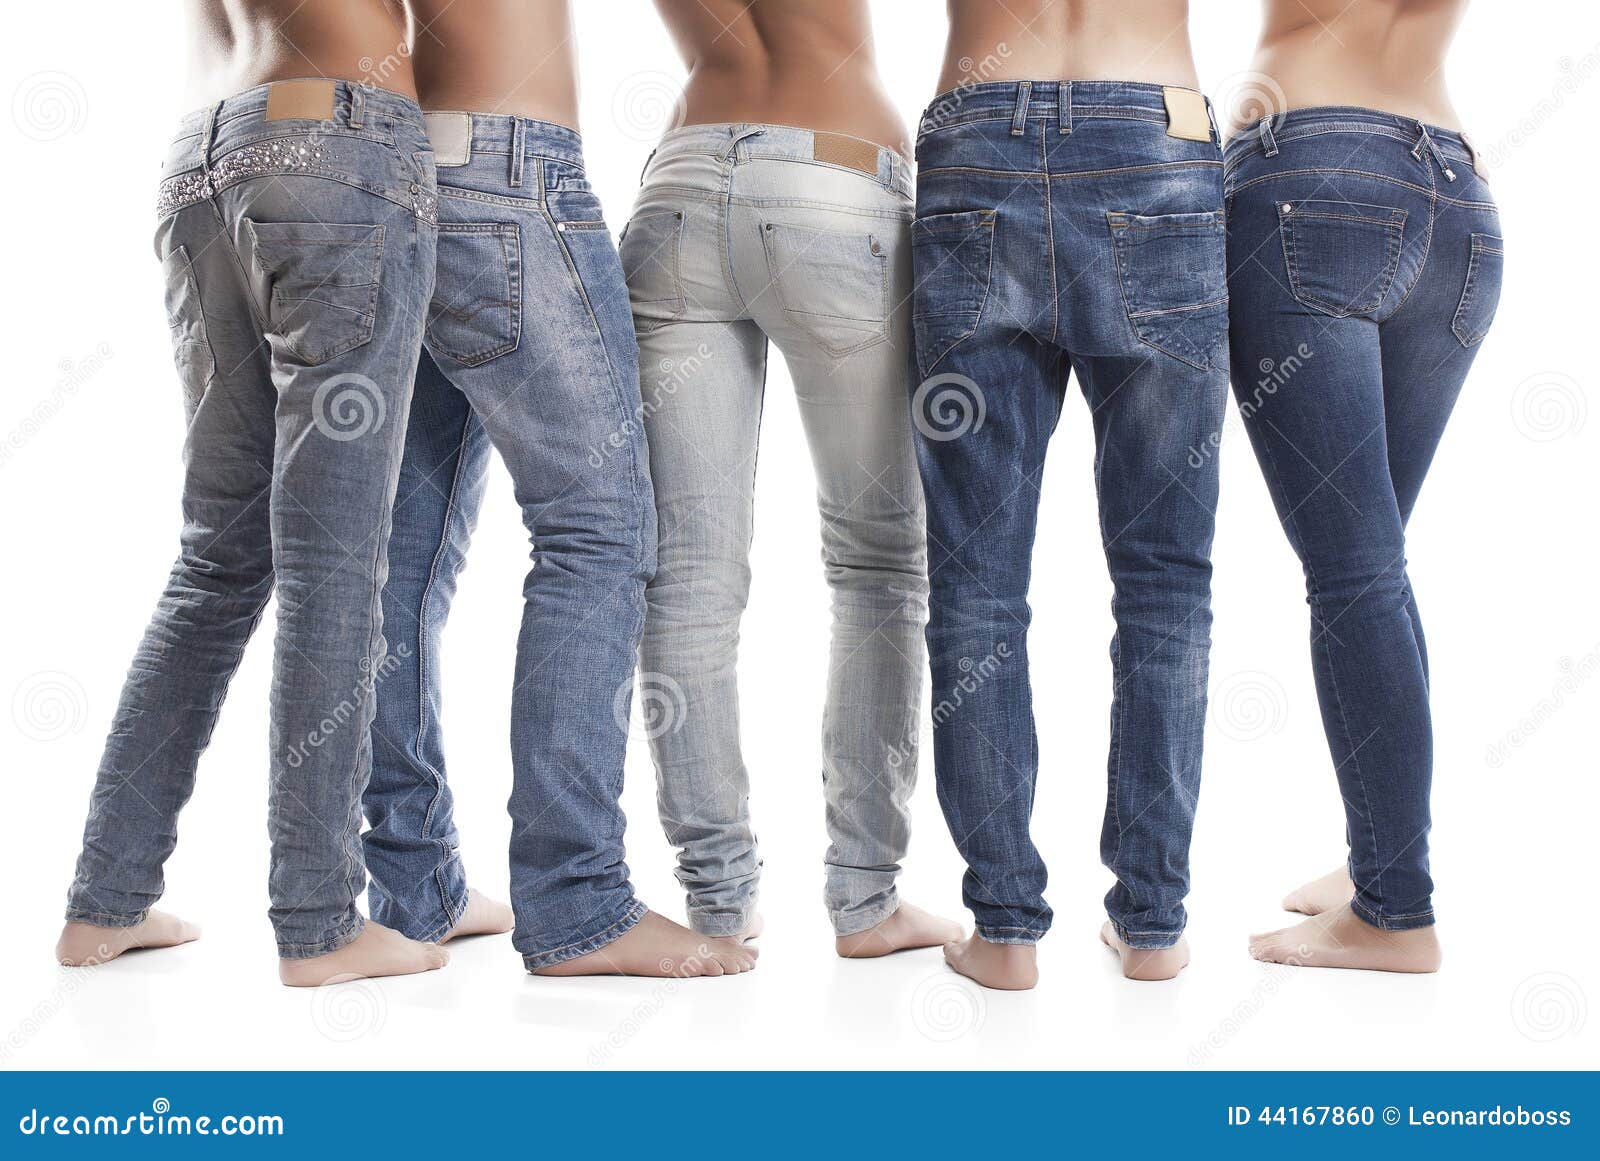 Closeup of Woman and Man Wearing Blue Jeans Stock Photo - Image of rear ...